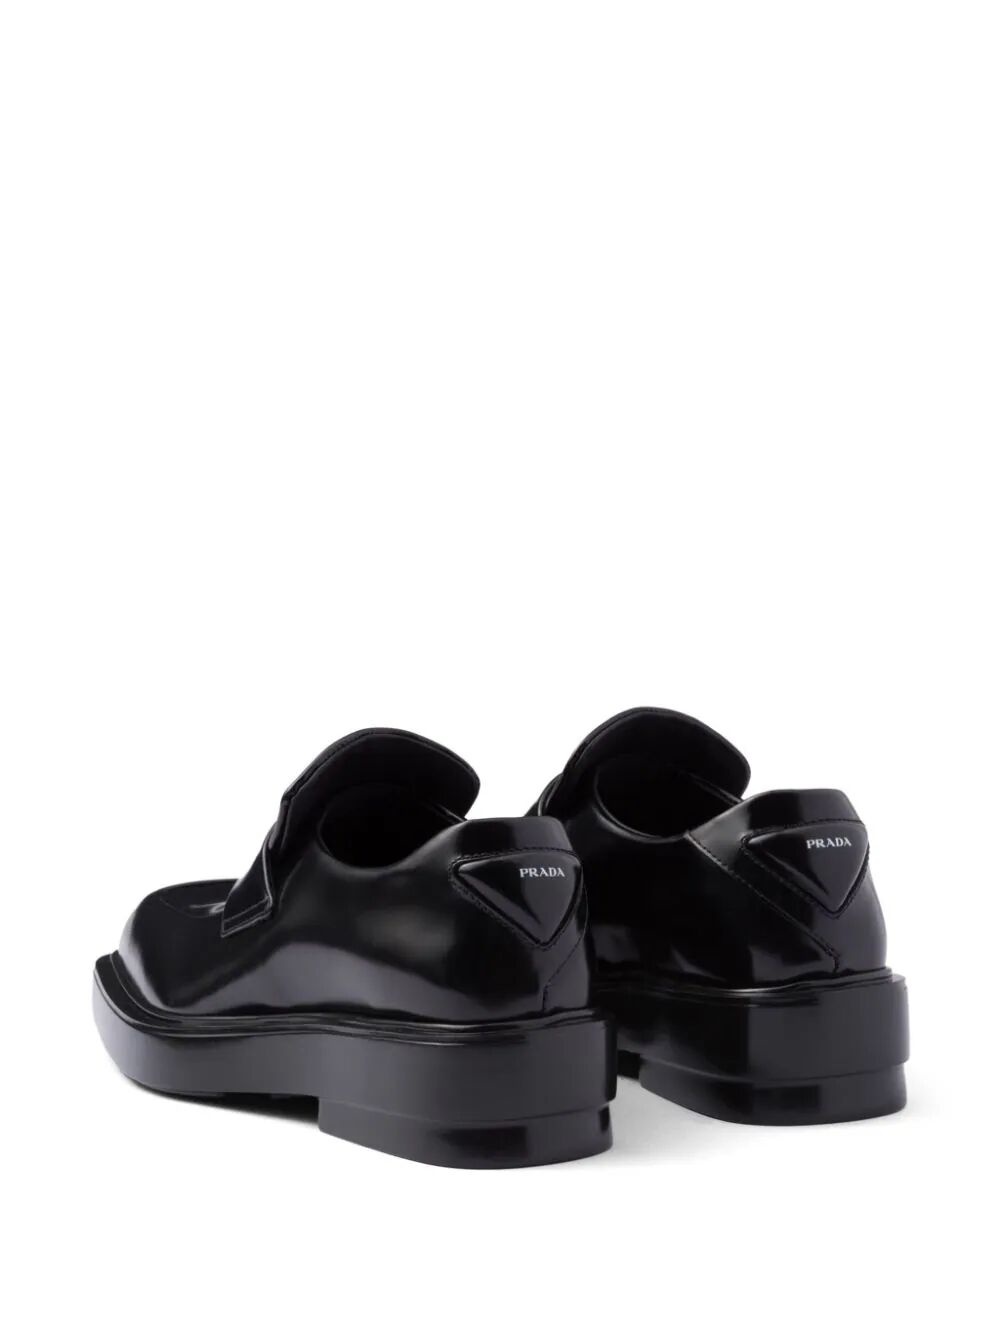 PRADA FENDER SQUARE LEATHER LOAFERS - 17